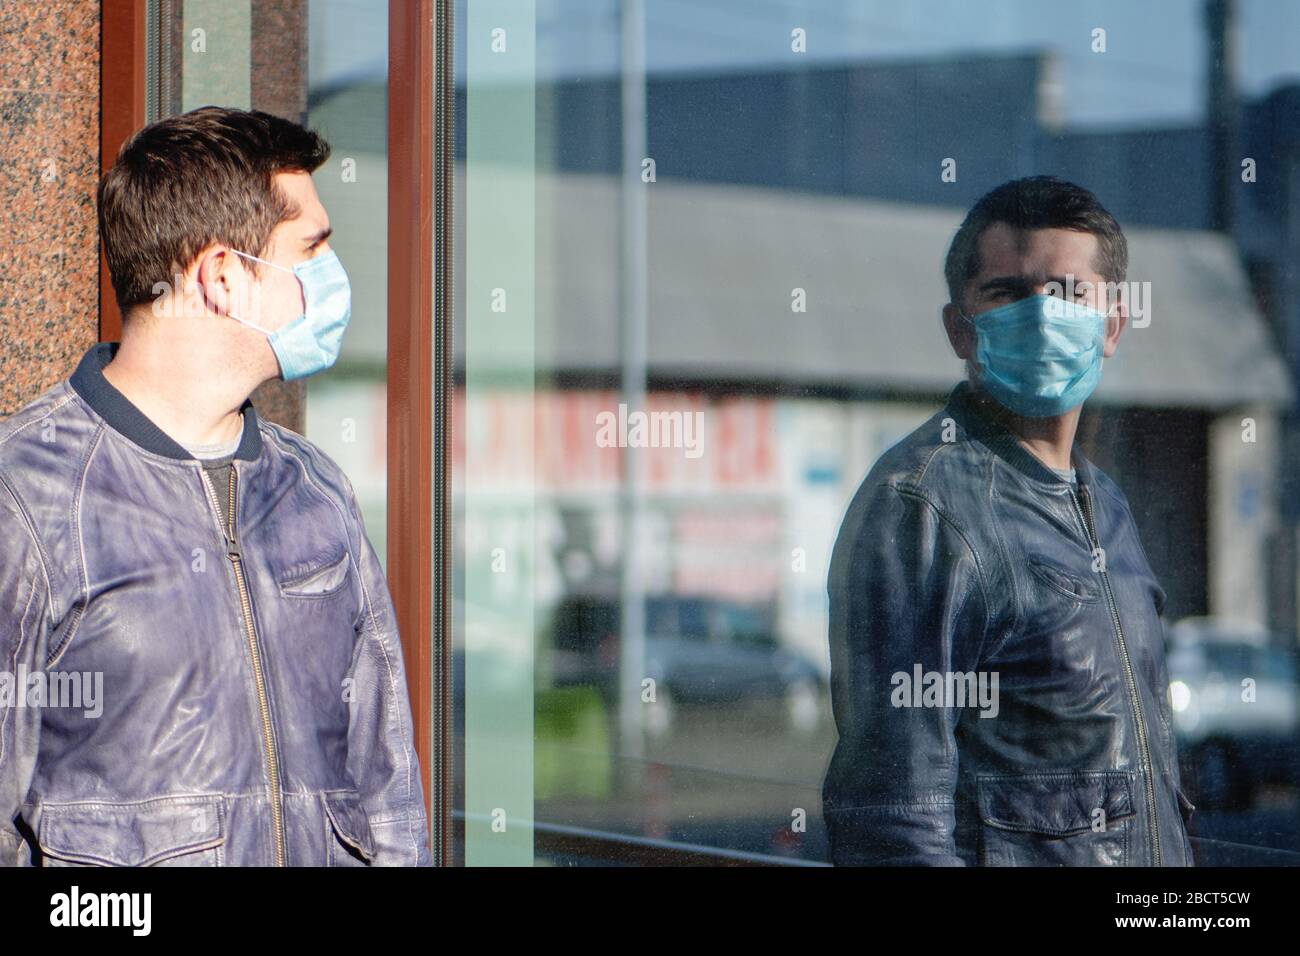 Young man in protective medical mask looking at his reflection in the window at the street. Stock Photo